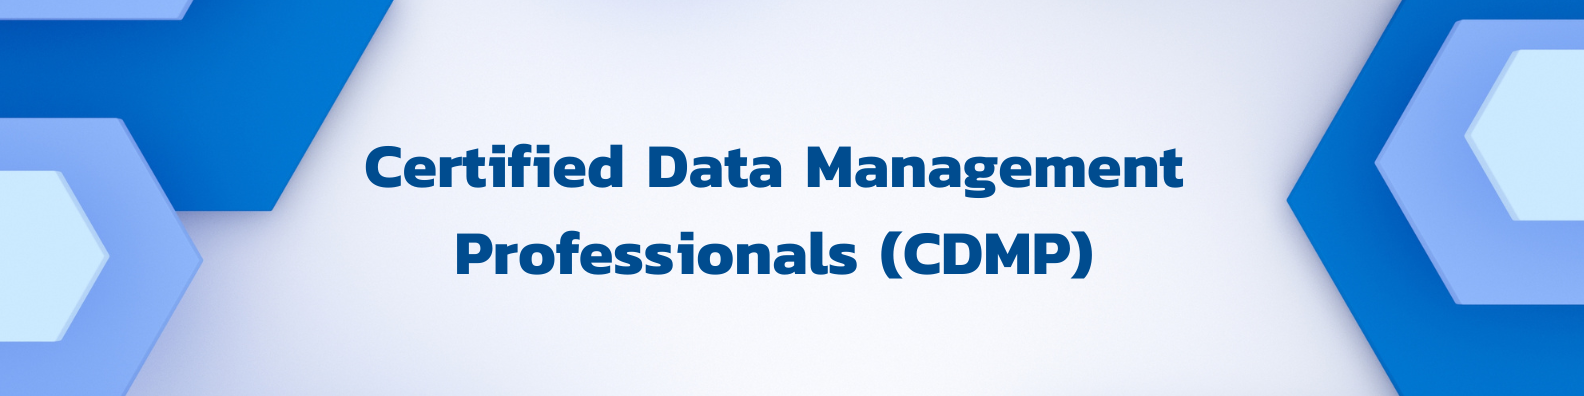 Certified Data Management Professionals (CDMP) – Exam Included (New!!)